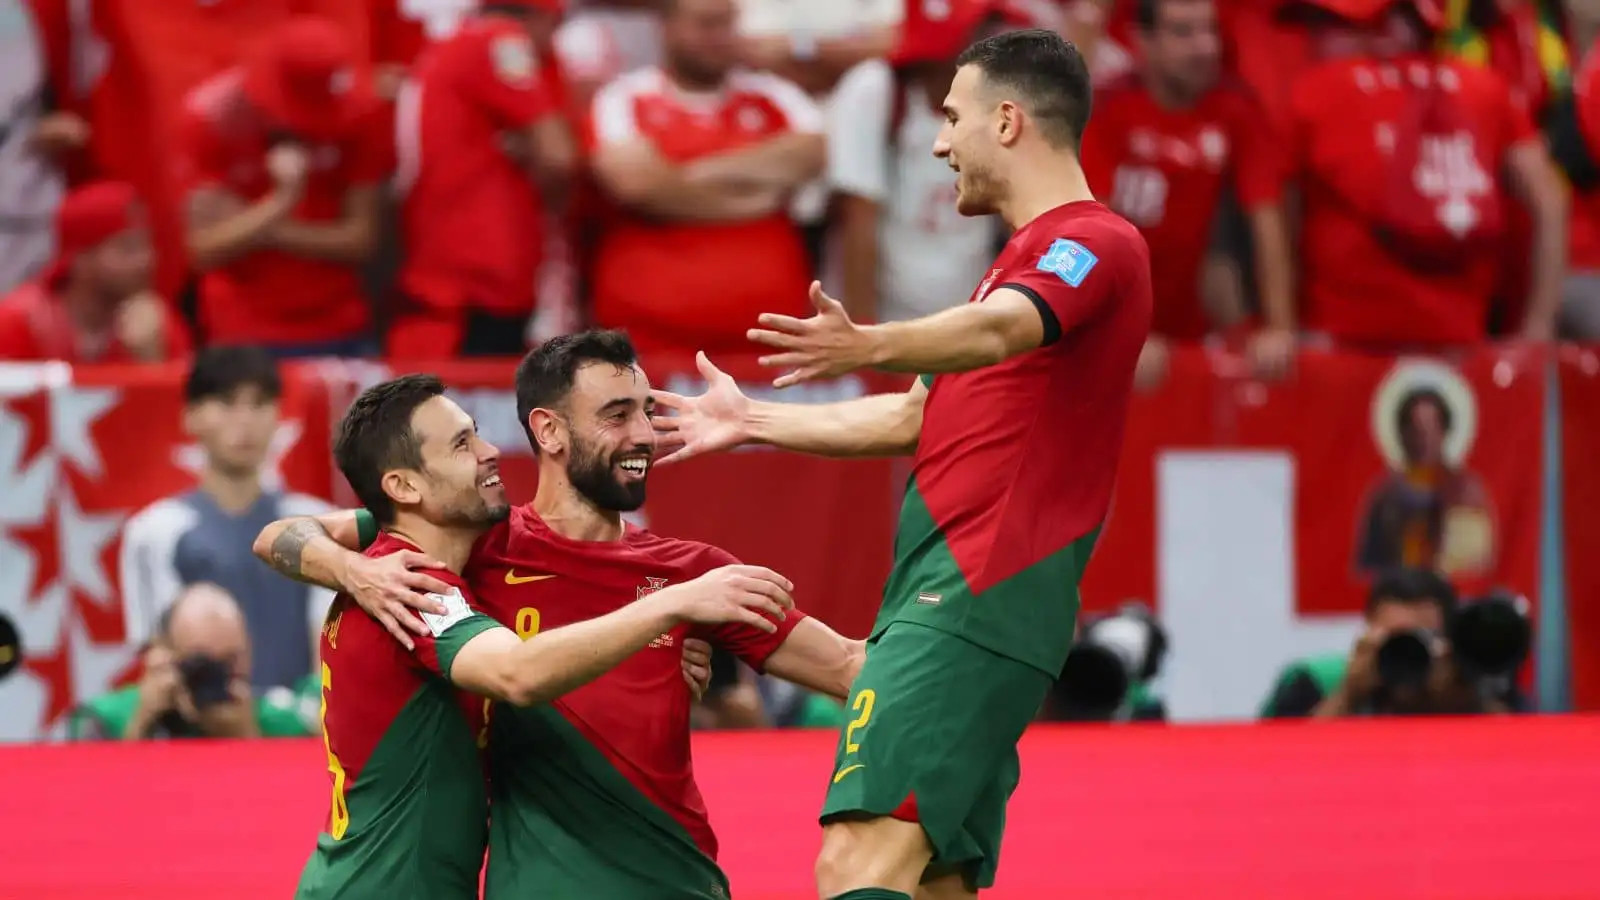 Raphael Guerreiro, Bruno Fernandes, Diogo Dalot of Portugal celebrate a goal at the 2022 World Cup